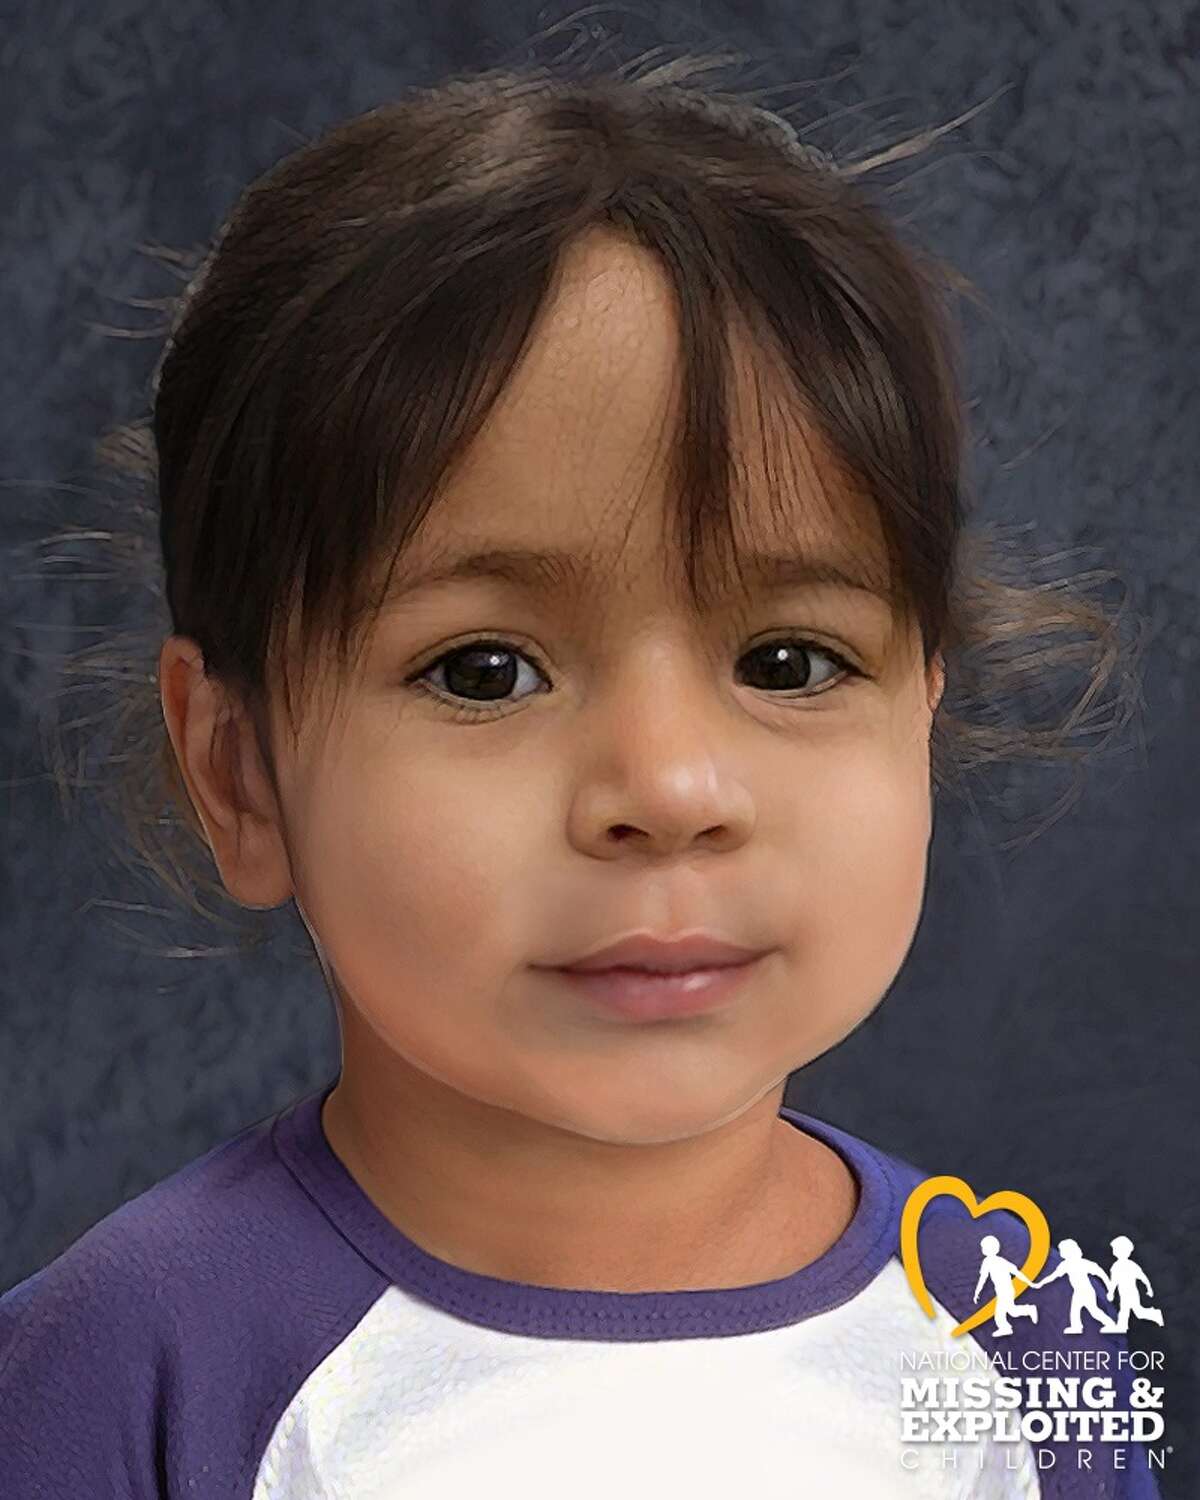 Vanessa Morales, who turned four Sept. 7, has been missing since Dec. 2, 2019, when her mother Christine Holloway was discovered bludgeoned to death in a Myrtle Street home, according to Ansonia police. Pictured: an age-progressed image of Vanessa.